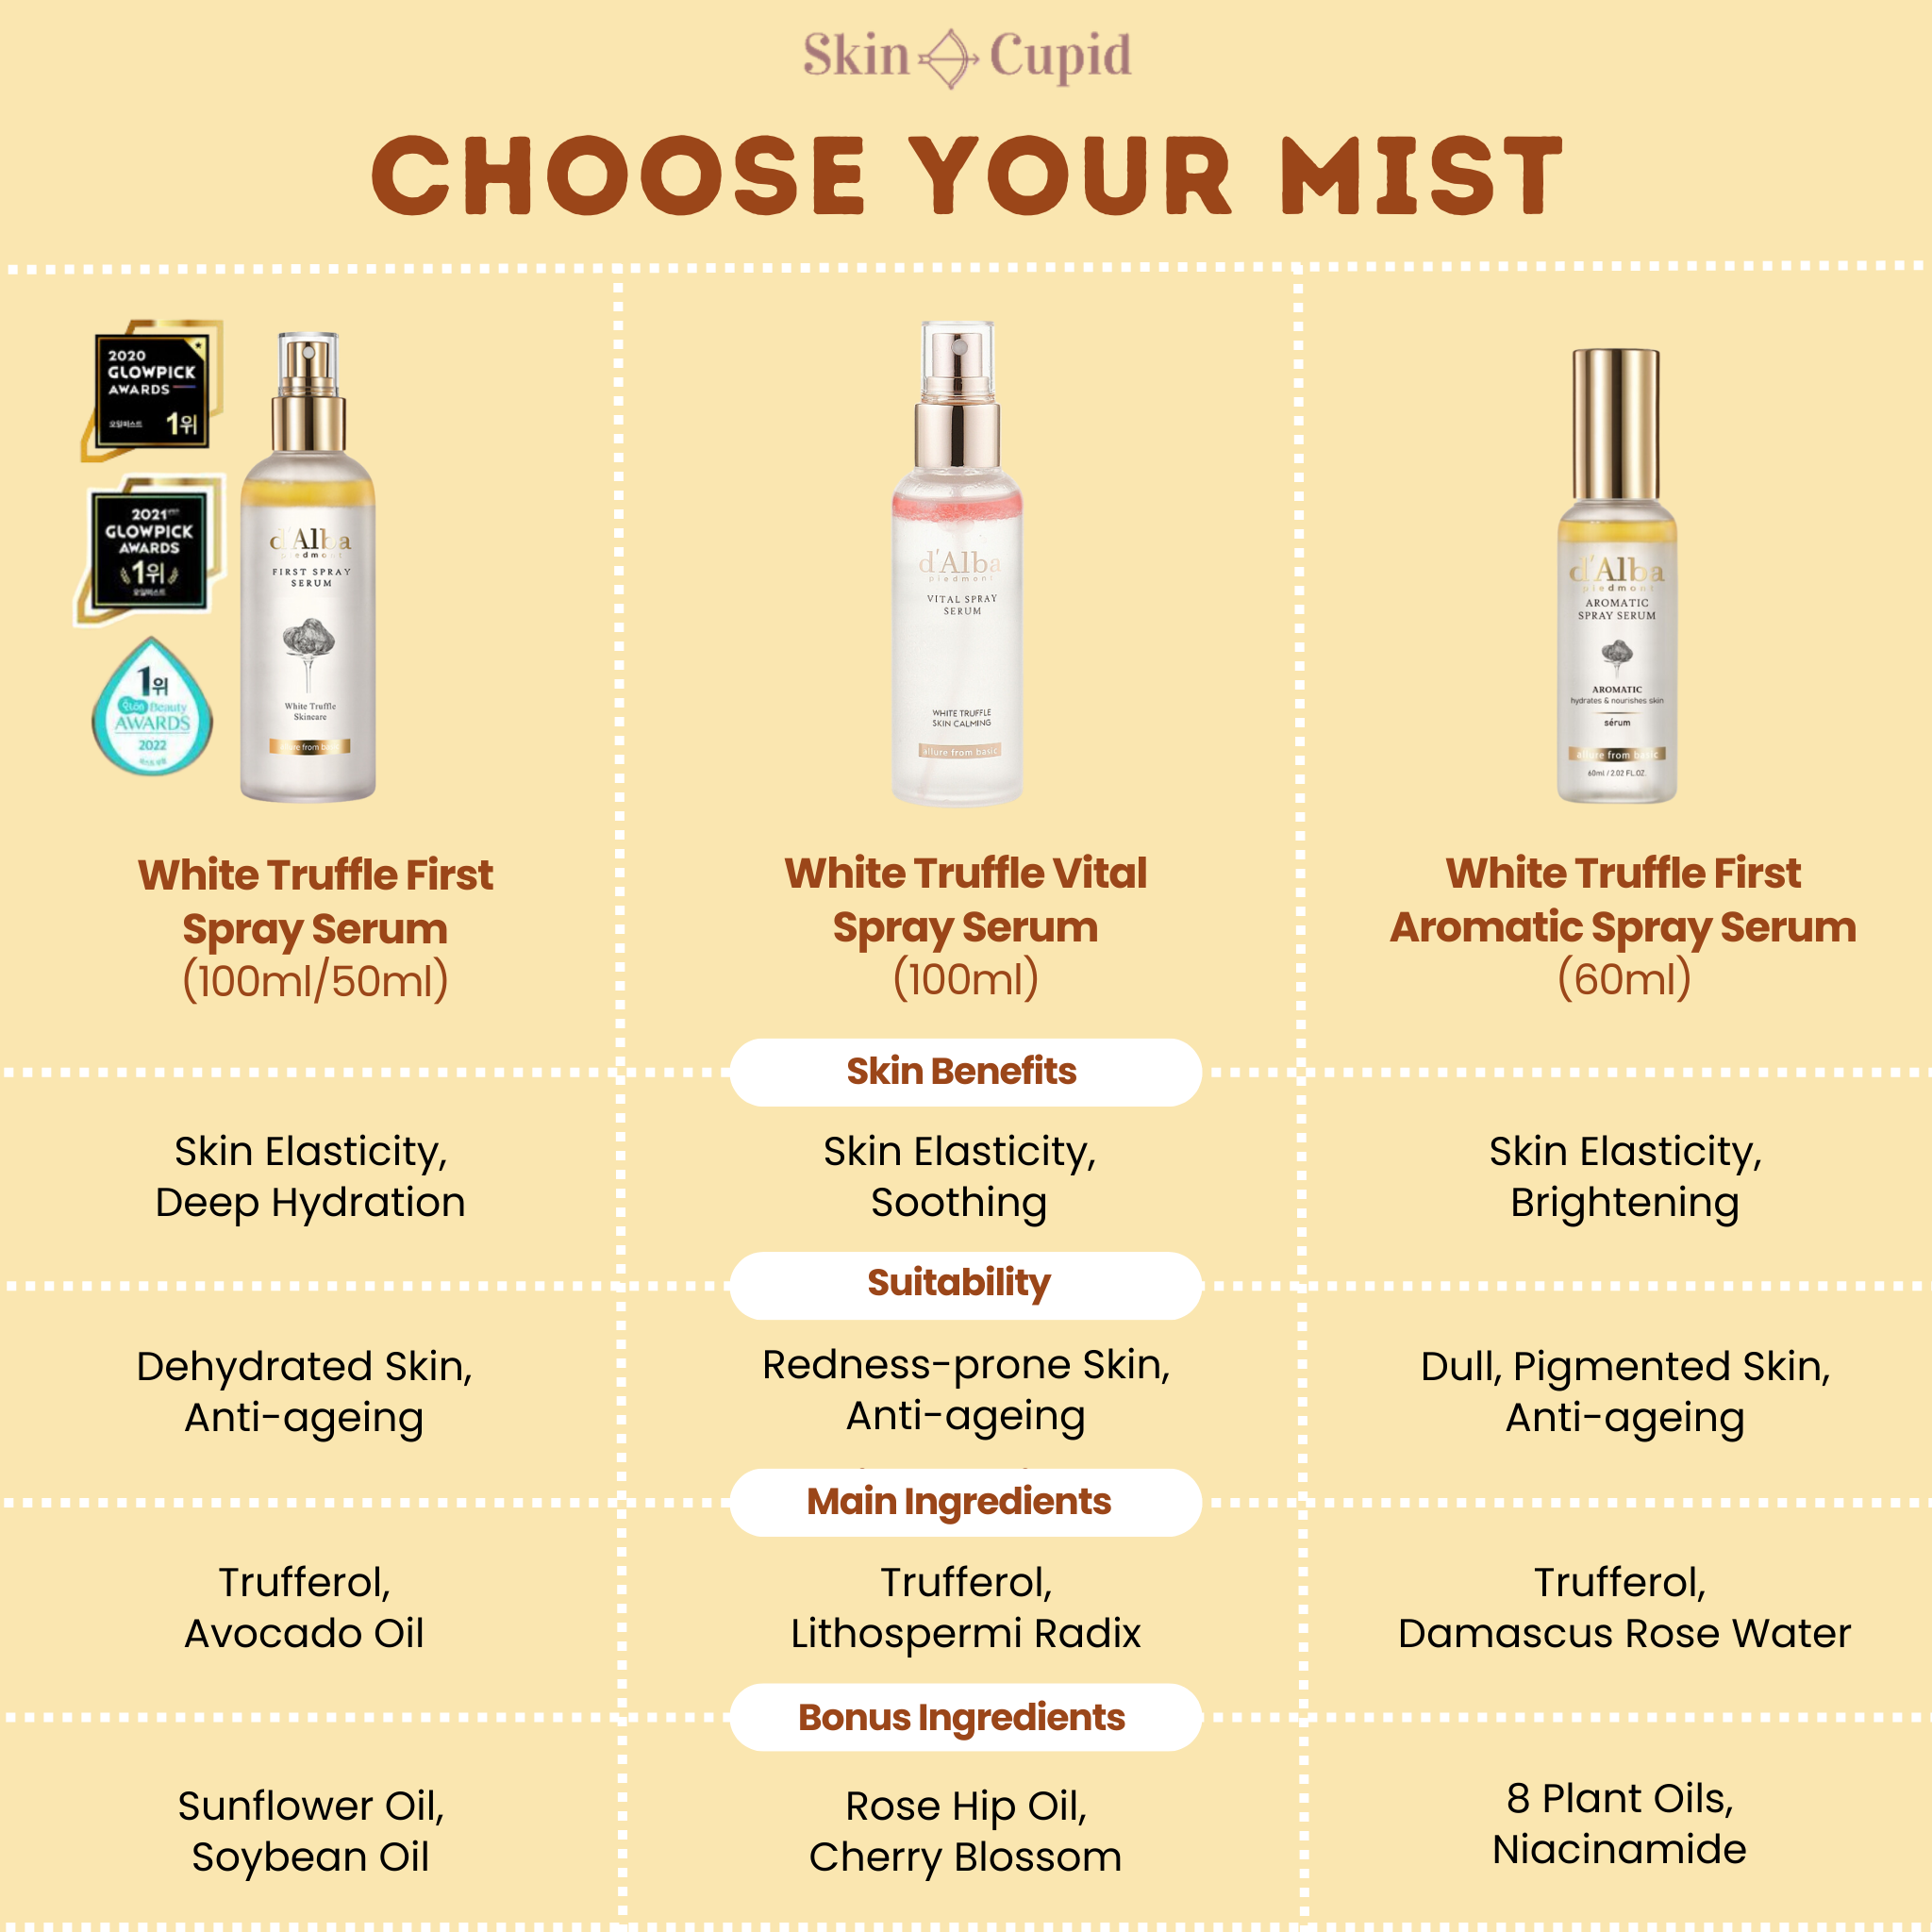 d'alba white truffle spray mist differences which one is right for you 